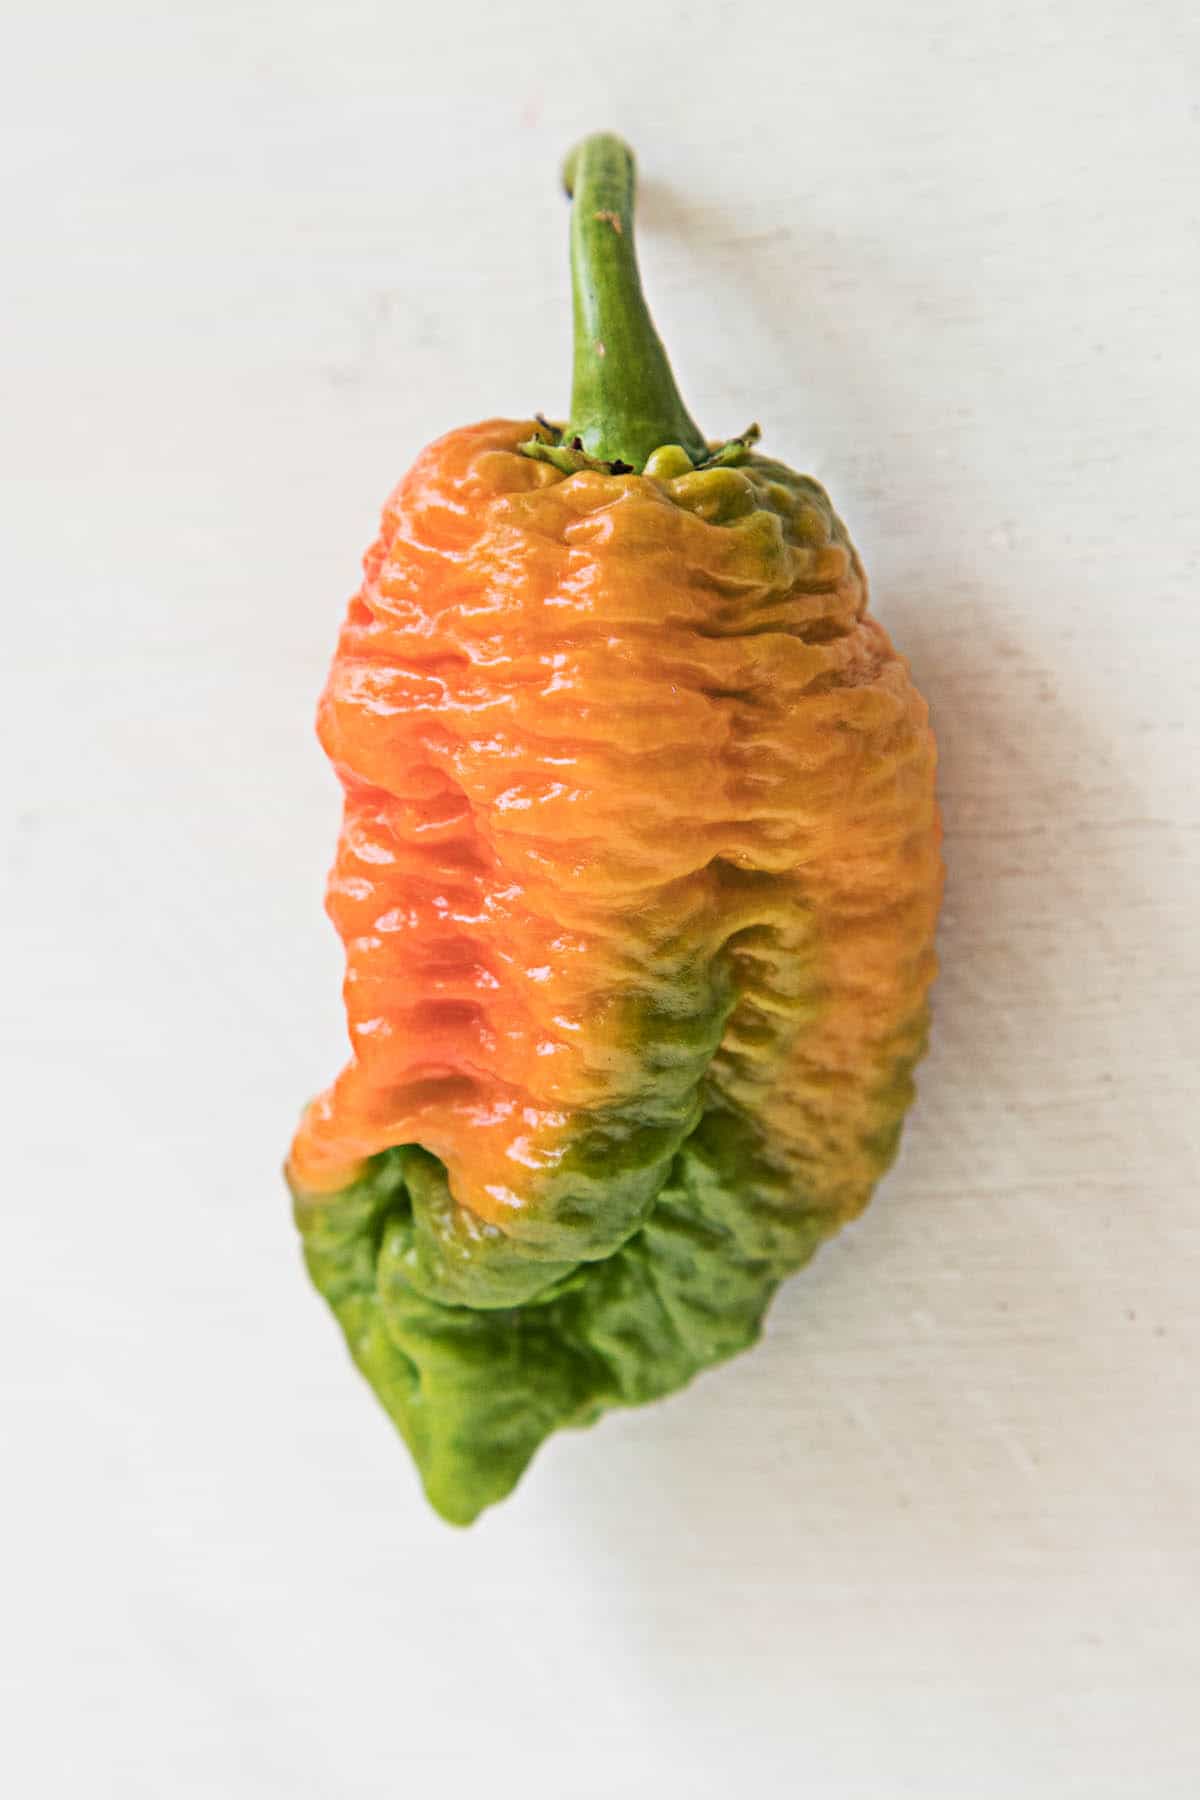 Brain Strain Chili Pepper - One of the Hottest Chili Peppers in the World